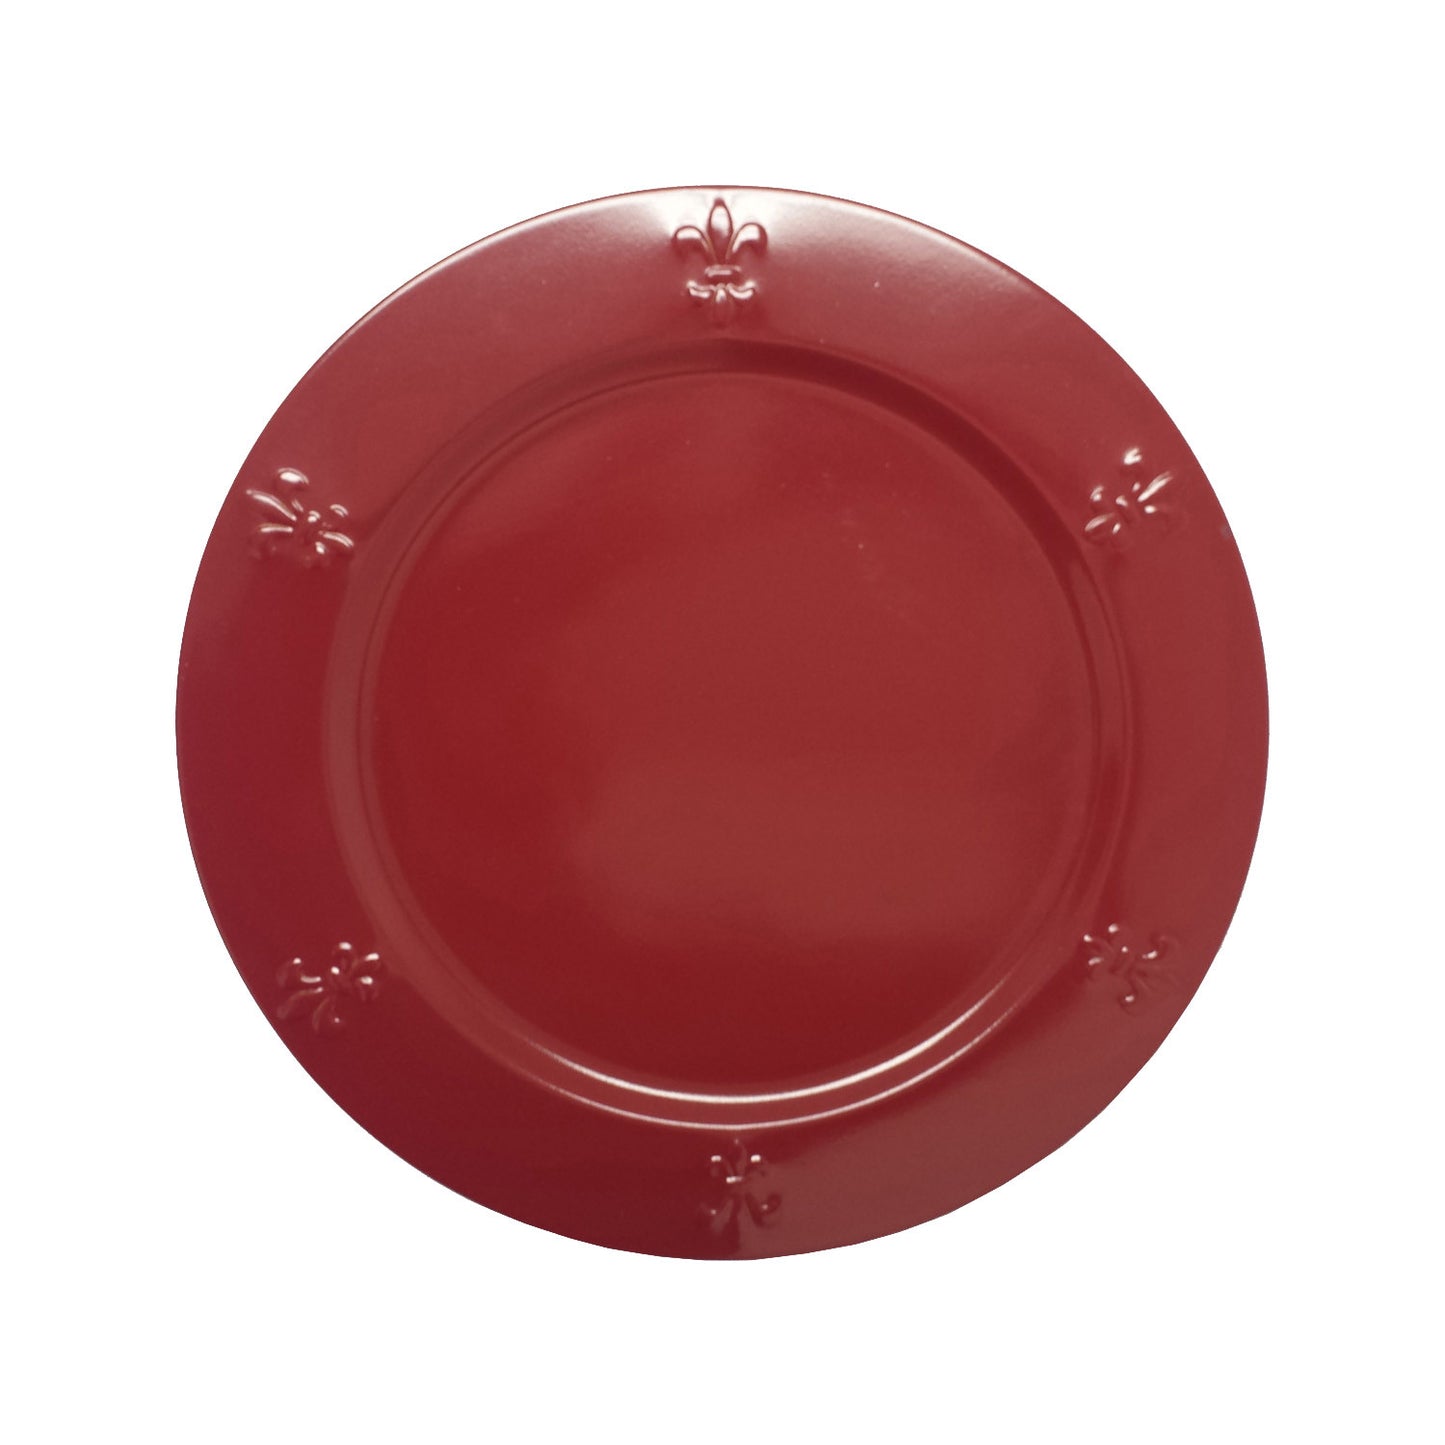 GiftBay Creations CP-009(S/4) Wedding Metal Charger Plates 13" Round with Beautiful Fleur-de-lis Embossed on Border Burgundy Finish Set of 4 Plates